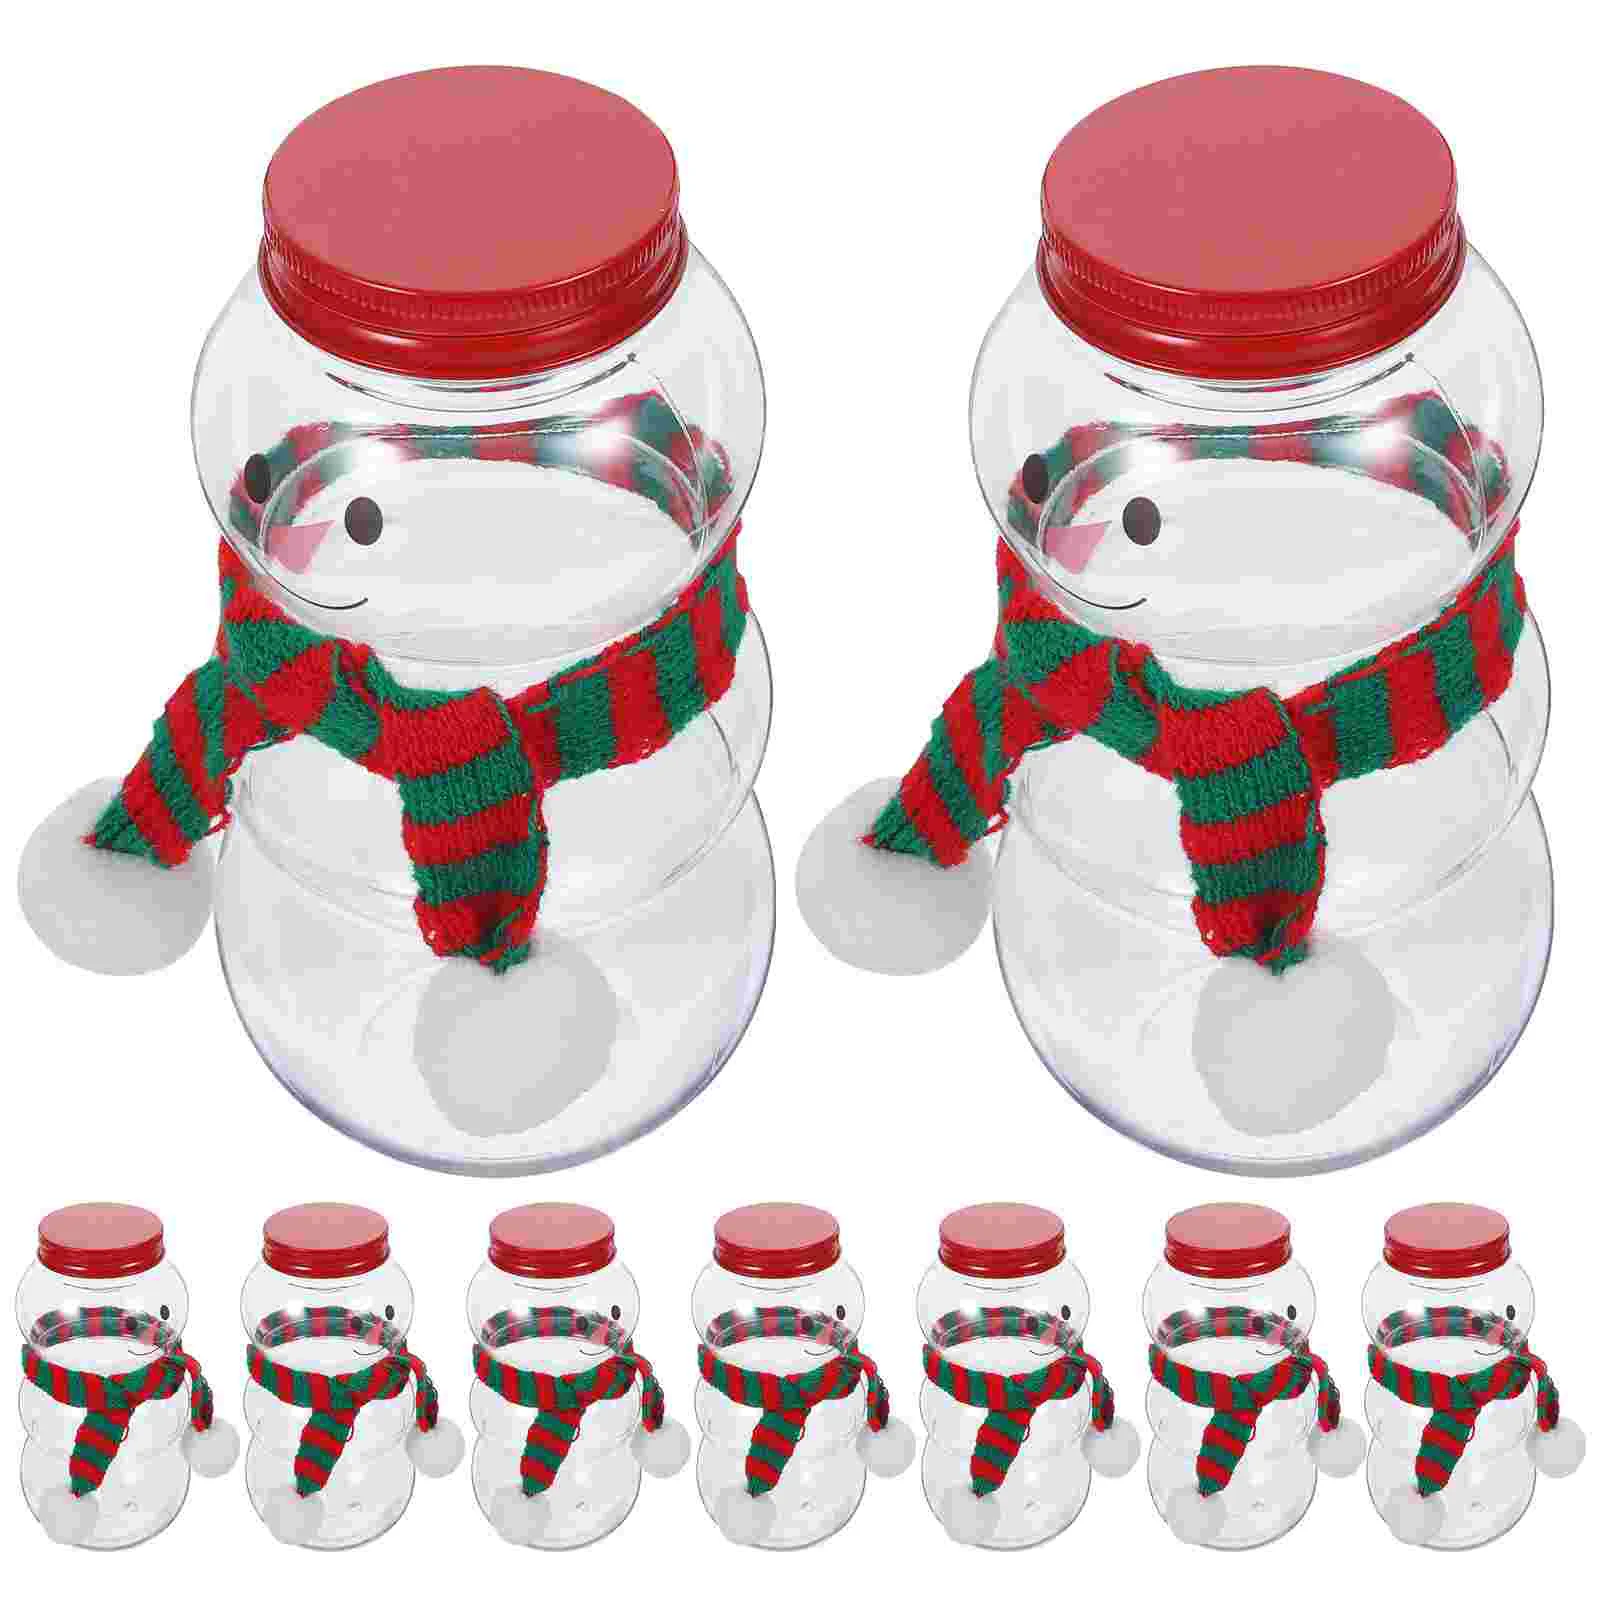 

10 Sets Drink Cup Drinking Candy Jars Milk Wrapping Bottles Empty Lids Plastic Water Caps Party Beverage Gift Juice